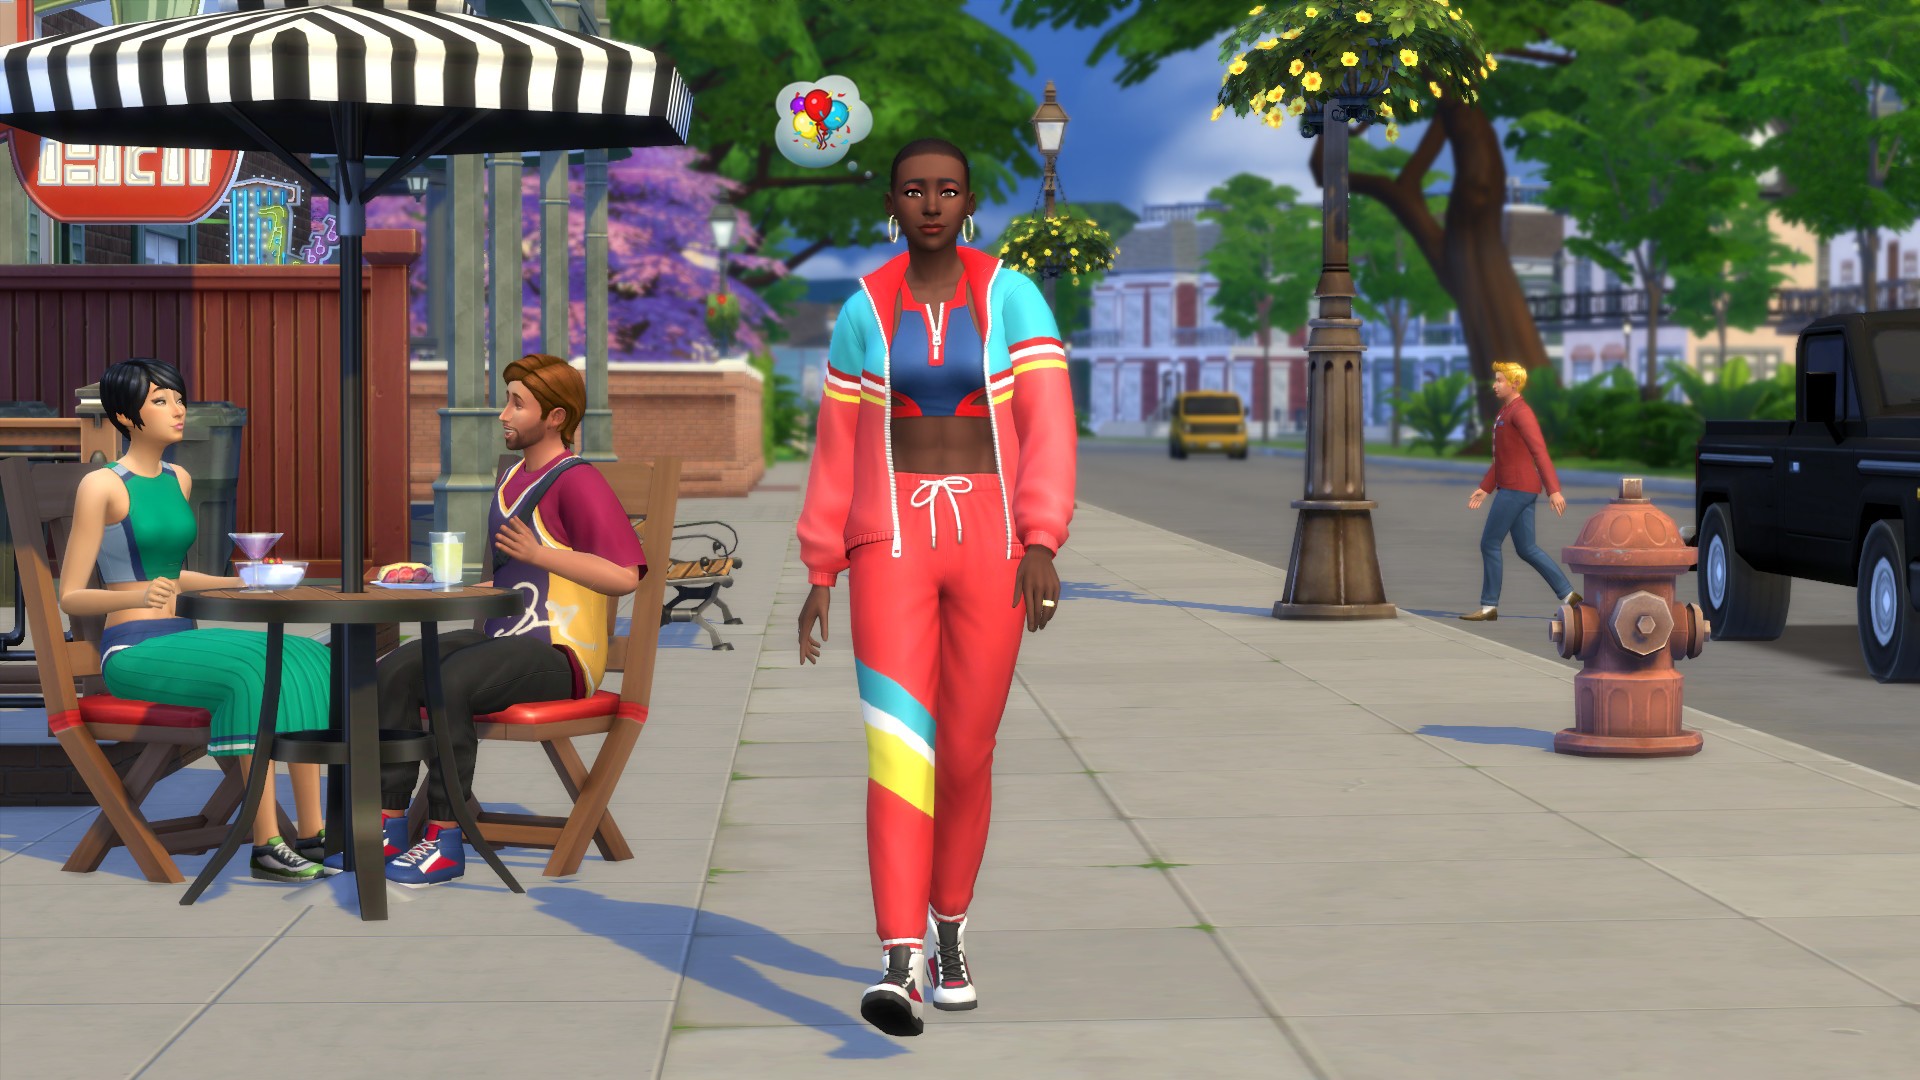 Summer of Sims roadmap reveal teases new expansions and updates for The